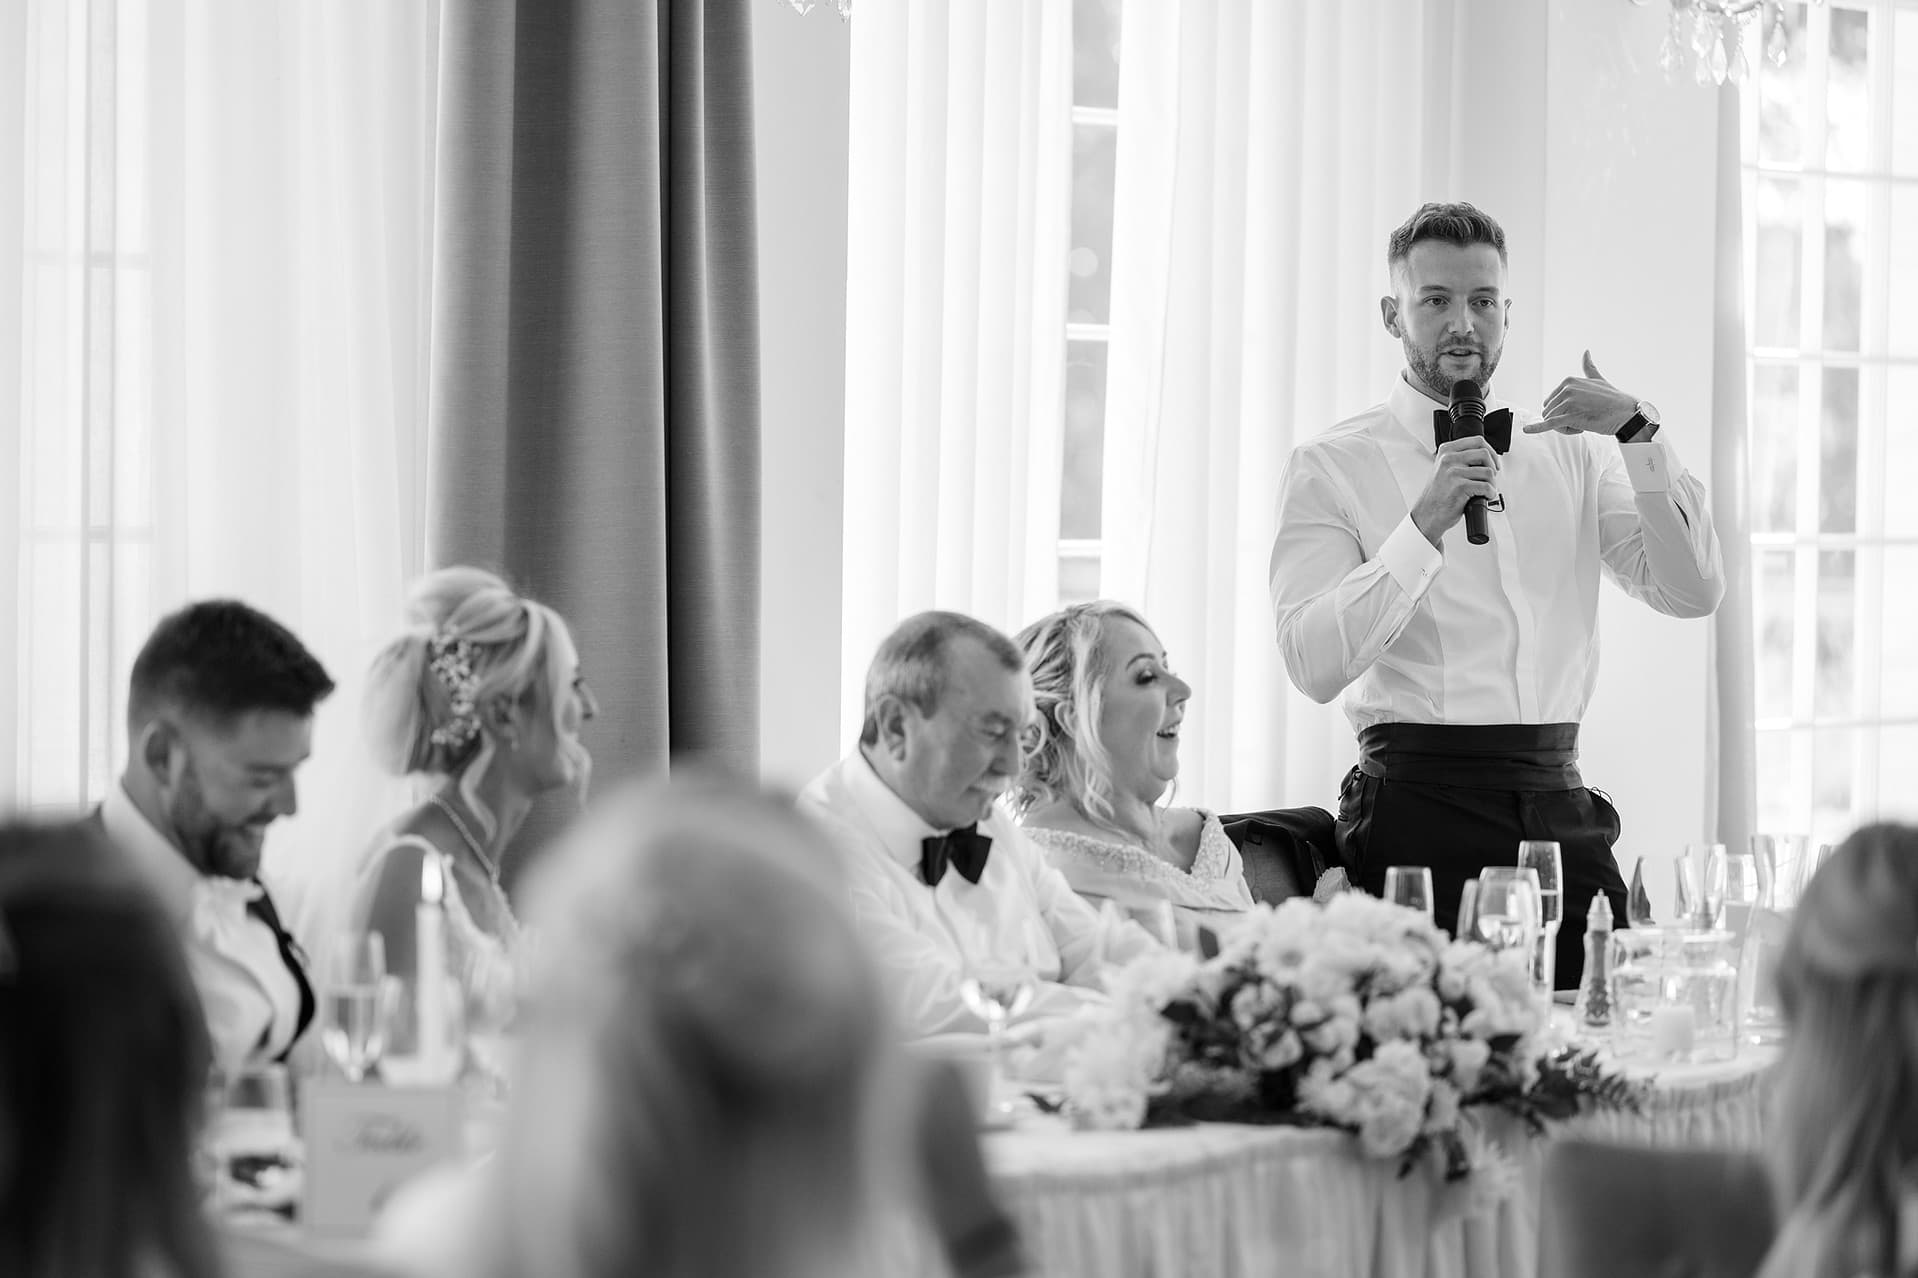 Best man making a 'phone' gesture with his hand during speech